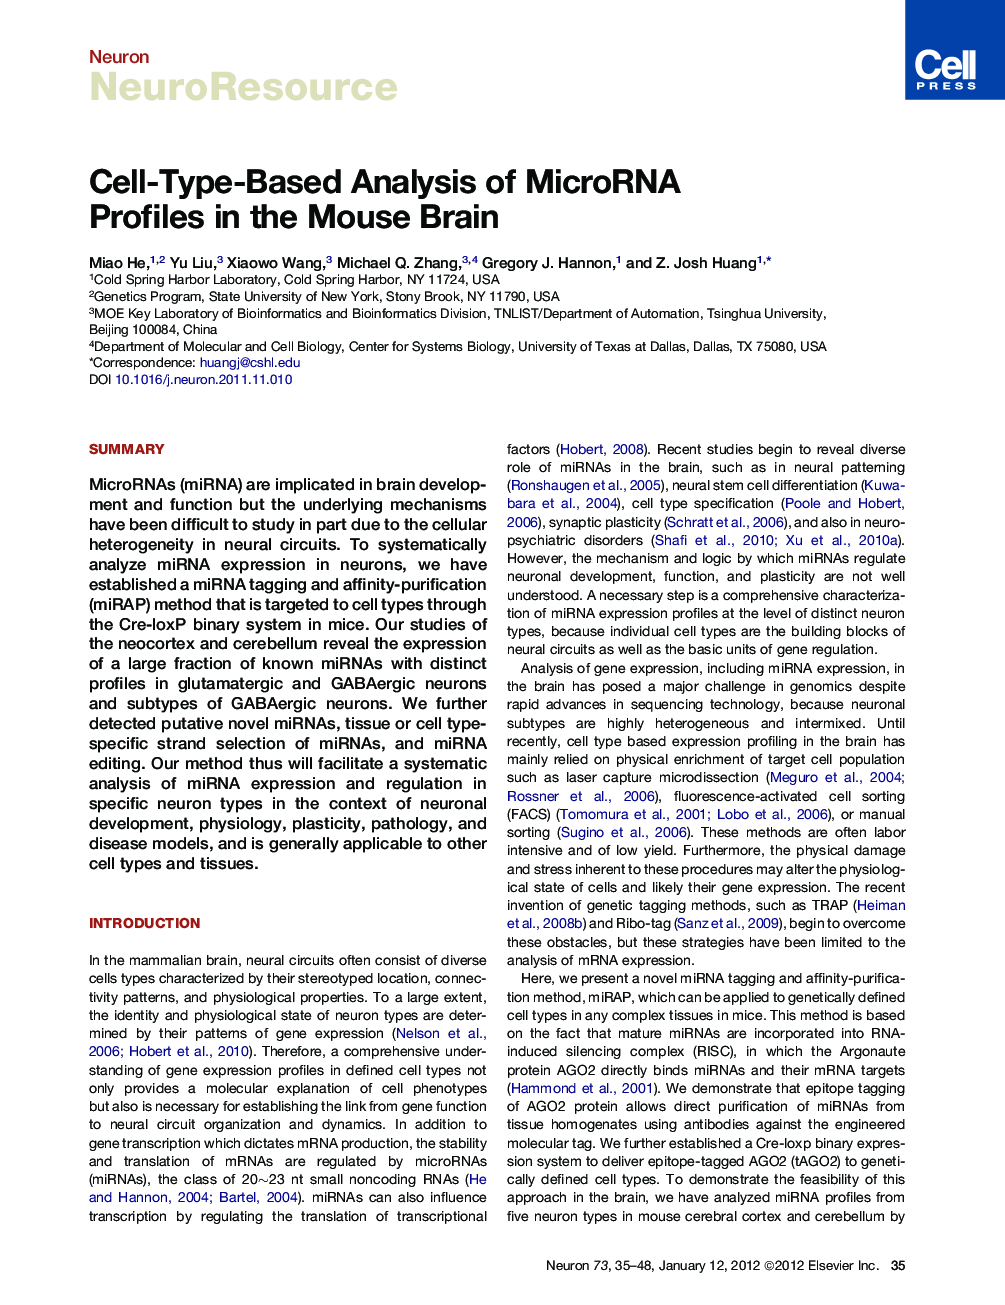 Cell-Type-Based Analysis of MicroRNA Profiles in the Mouse Brain